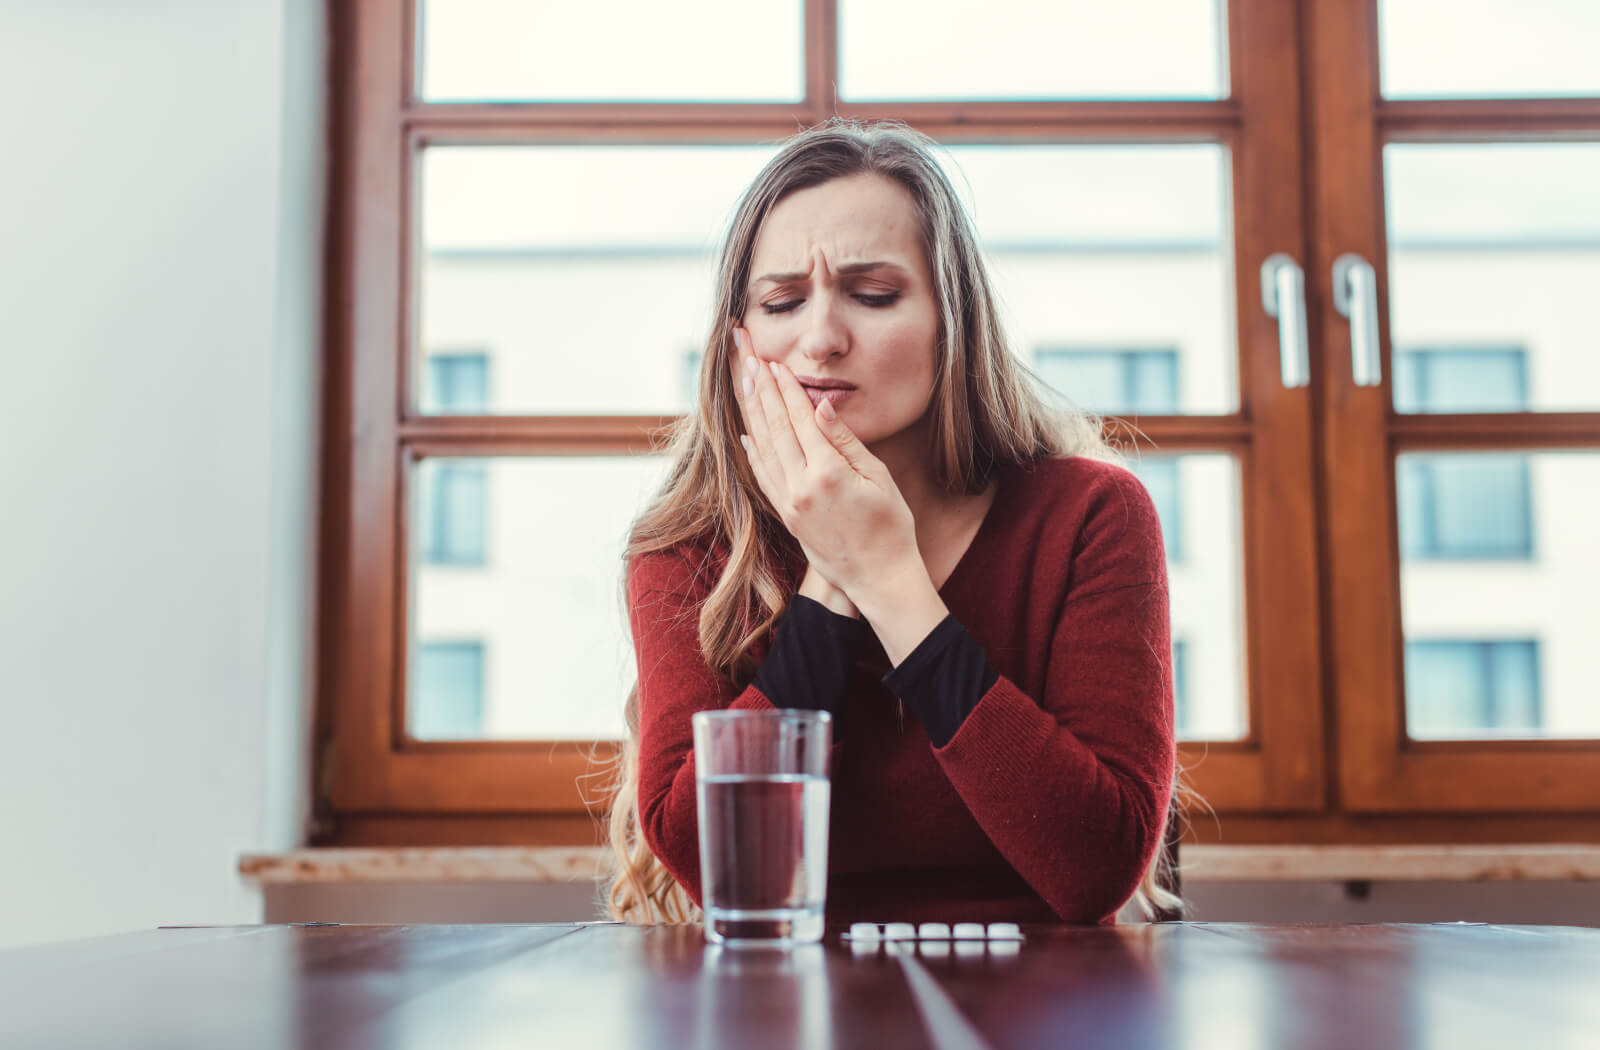 A woman is applying pressure to her cheek as she experiences toothache and is resorting to an over-the-counter pain reliever to ease the discomfort.